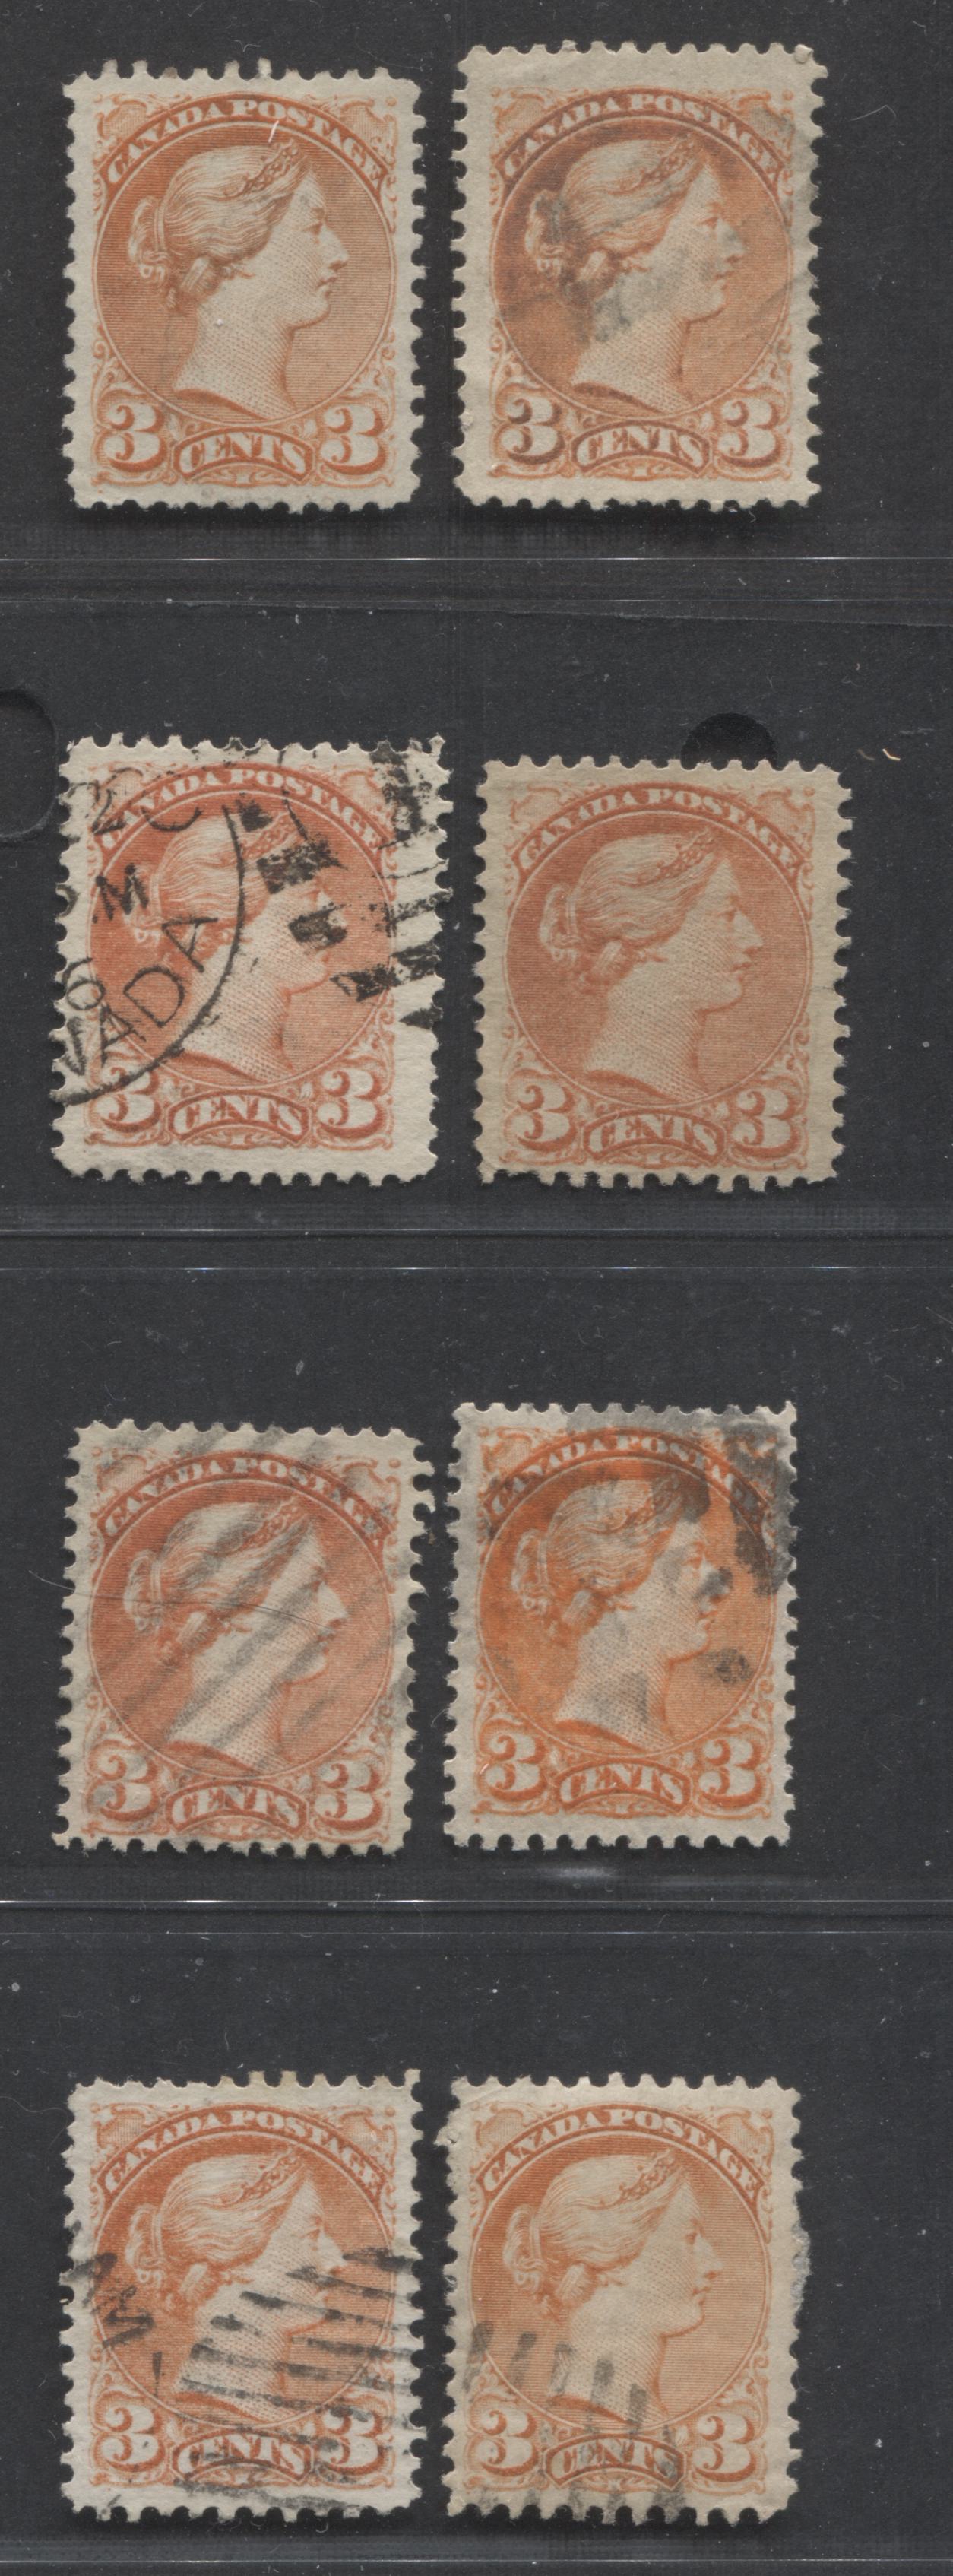 Lot 227 Canada #37, 37iii 3c Orange Red Queen Victoria, 1870-1897 Small Queen Issue, 8 VF Used Singles, All Montreal Printings, Perf. 12 and 11.75 x 12